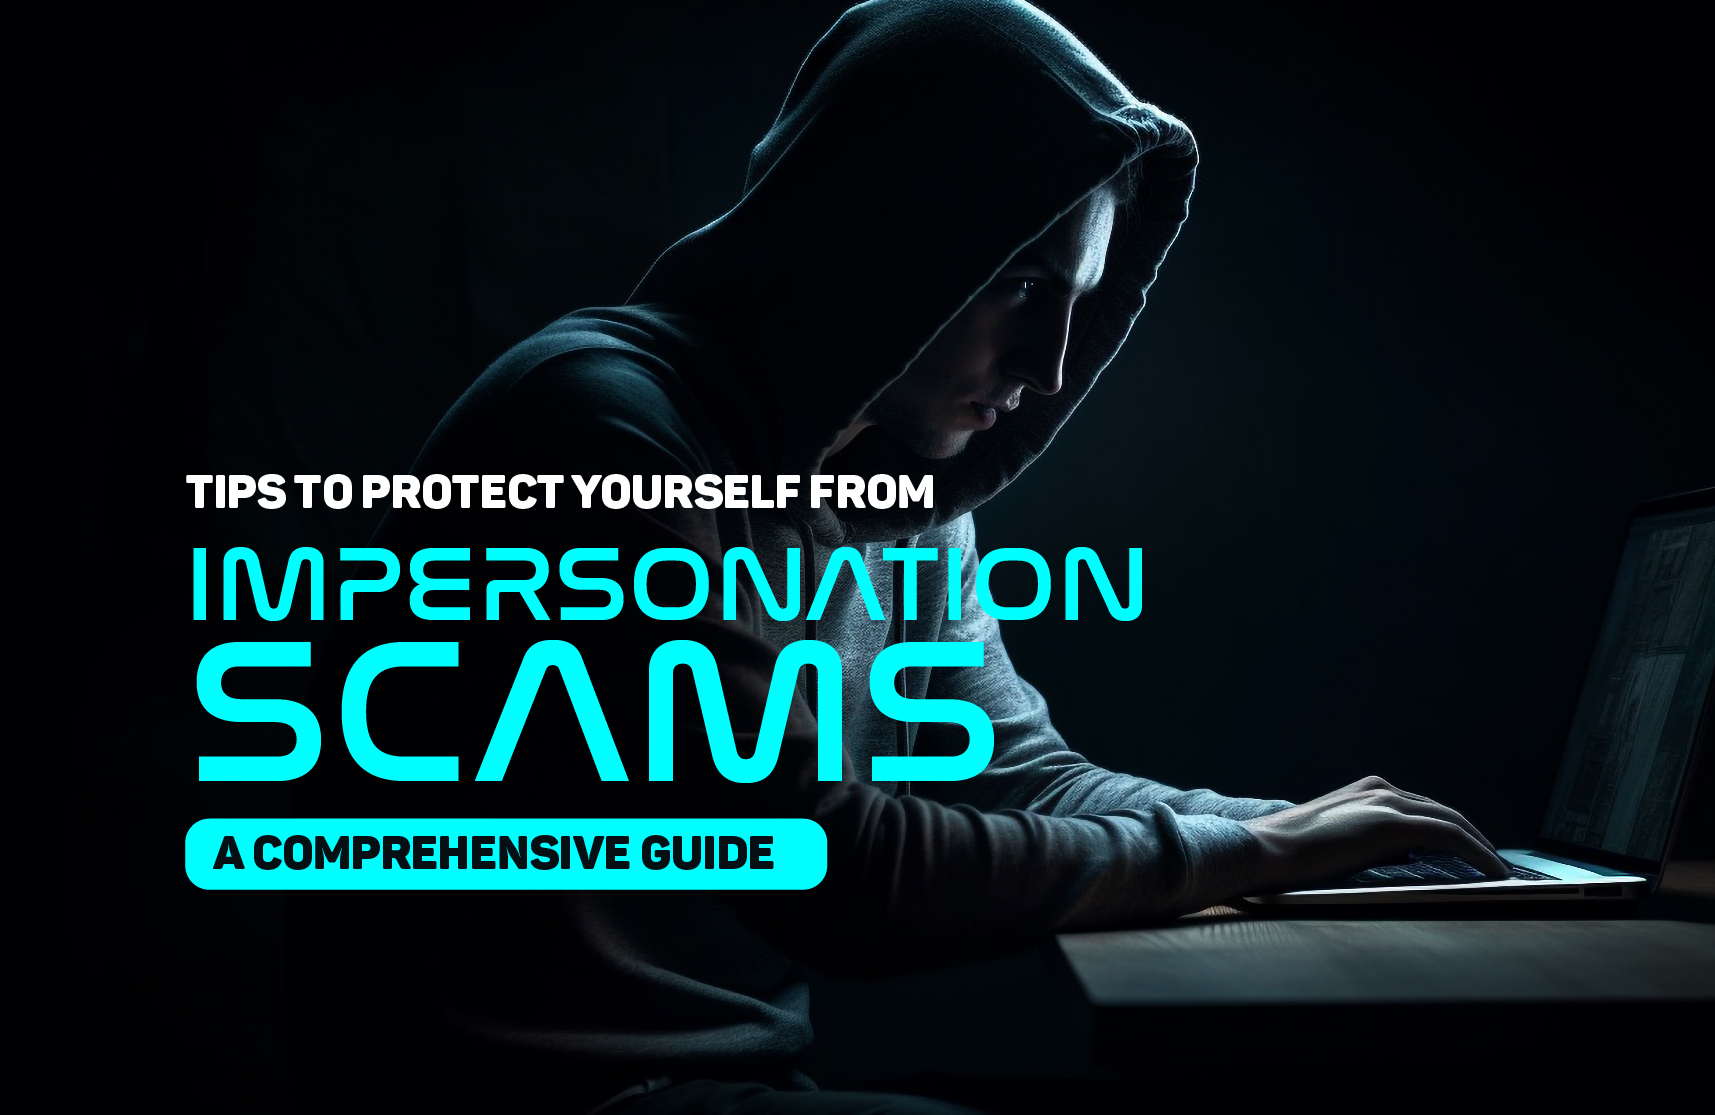 Tips to Protect Yourself from Impersonation Scams: A Comprehensive Guide